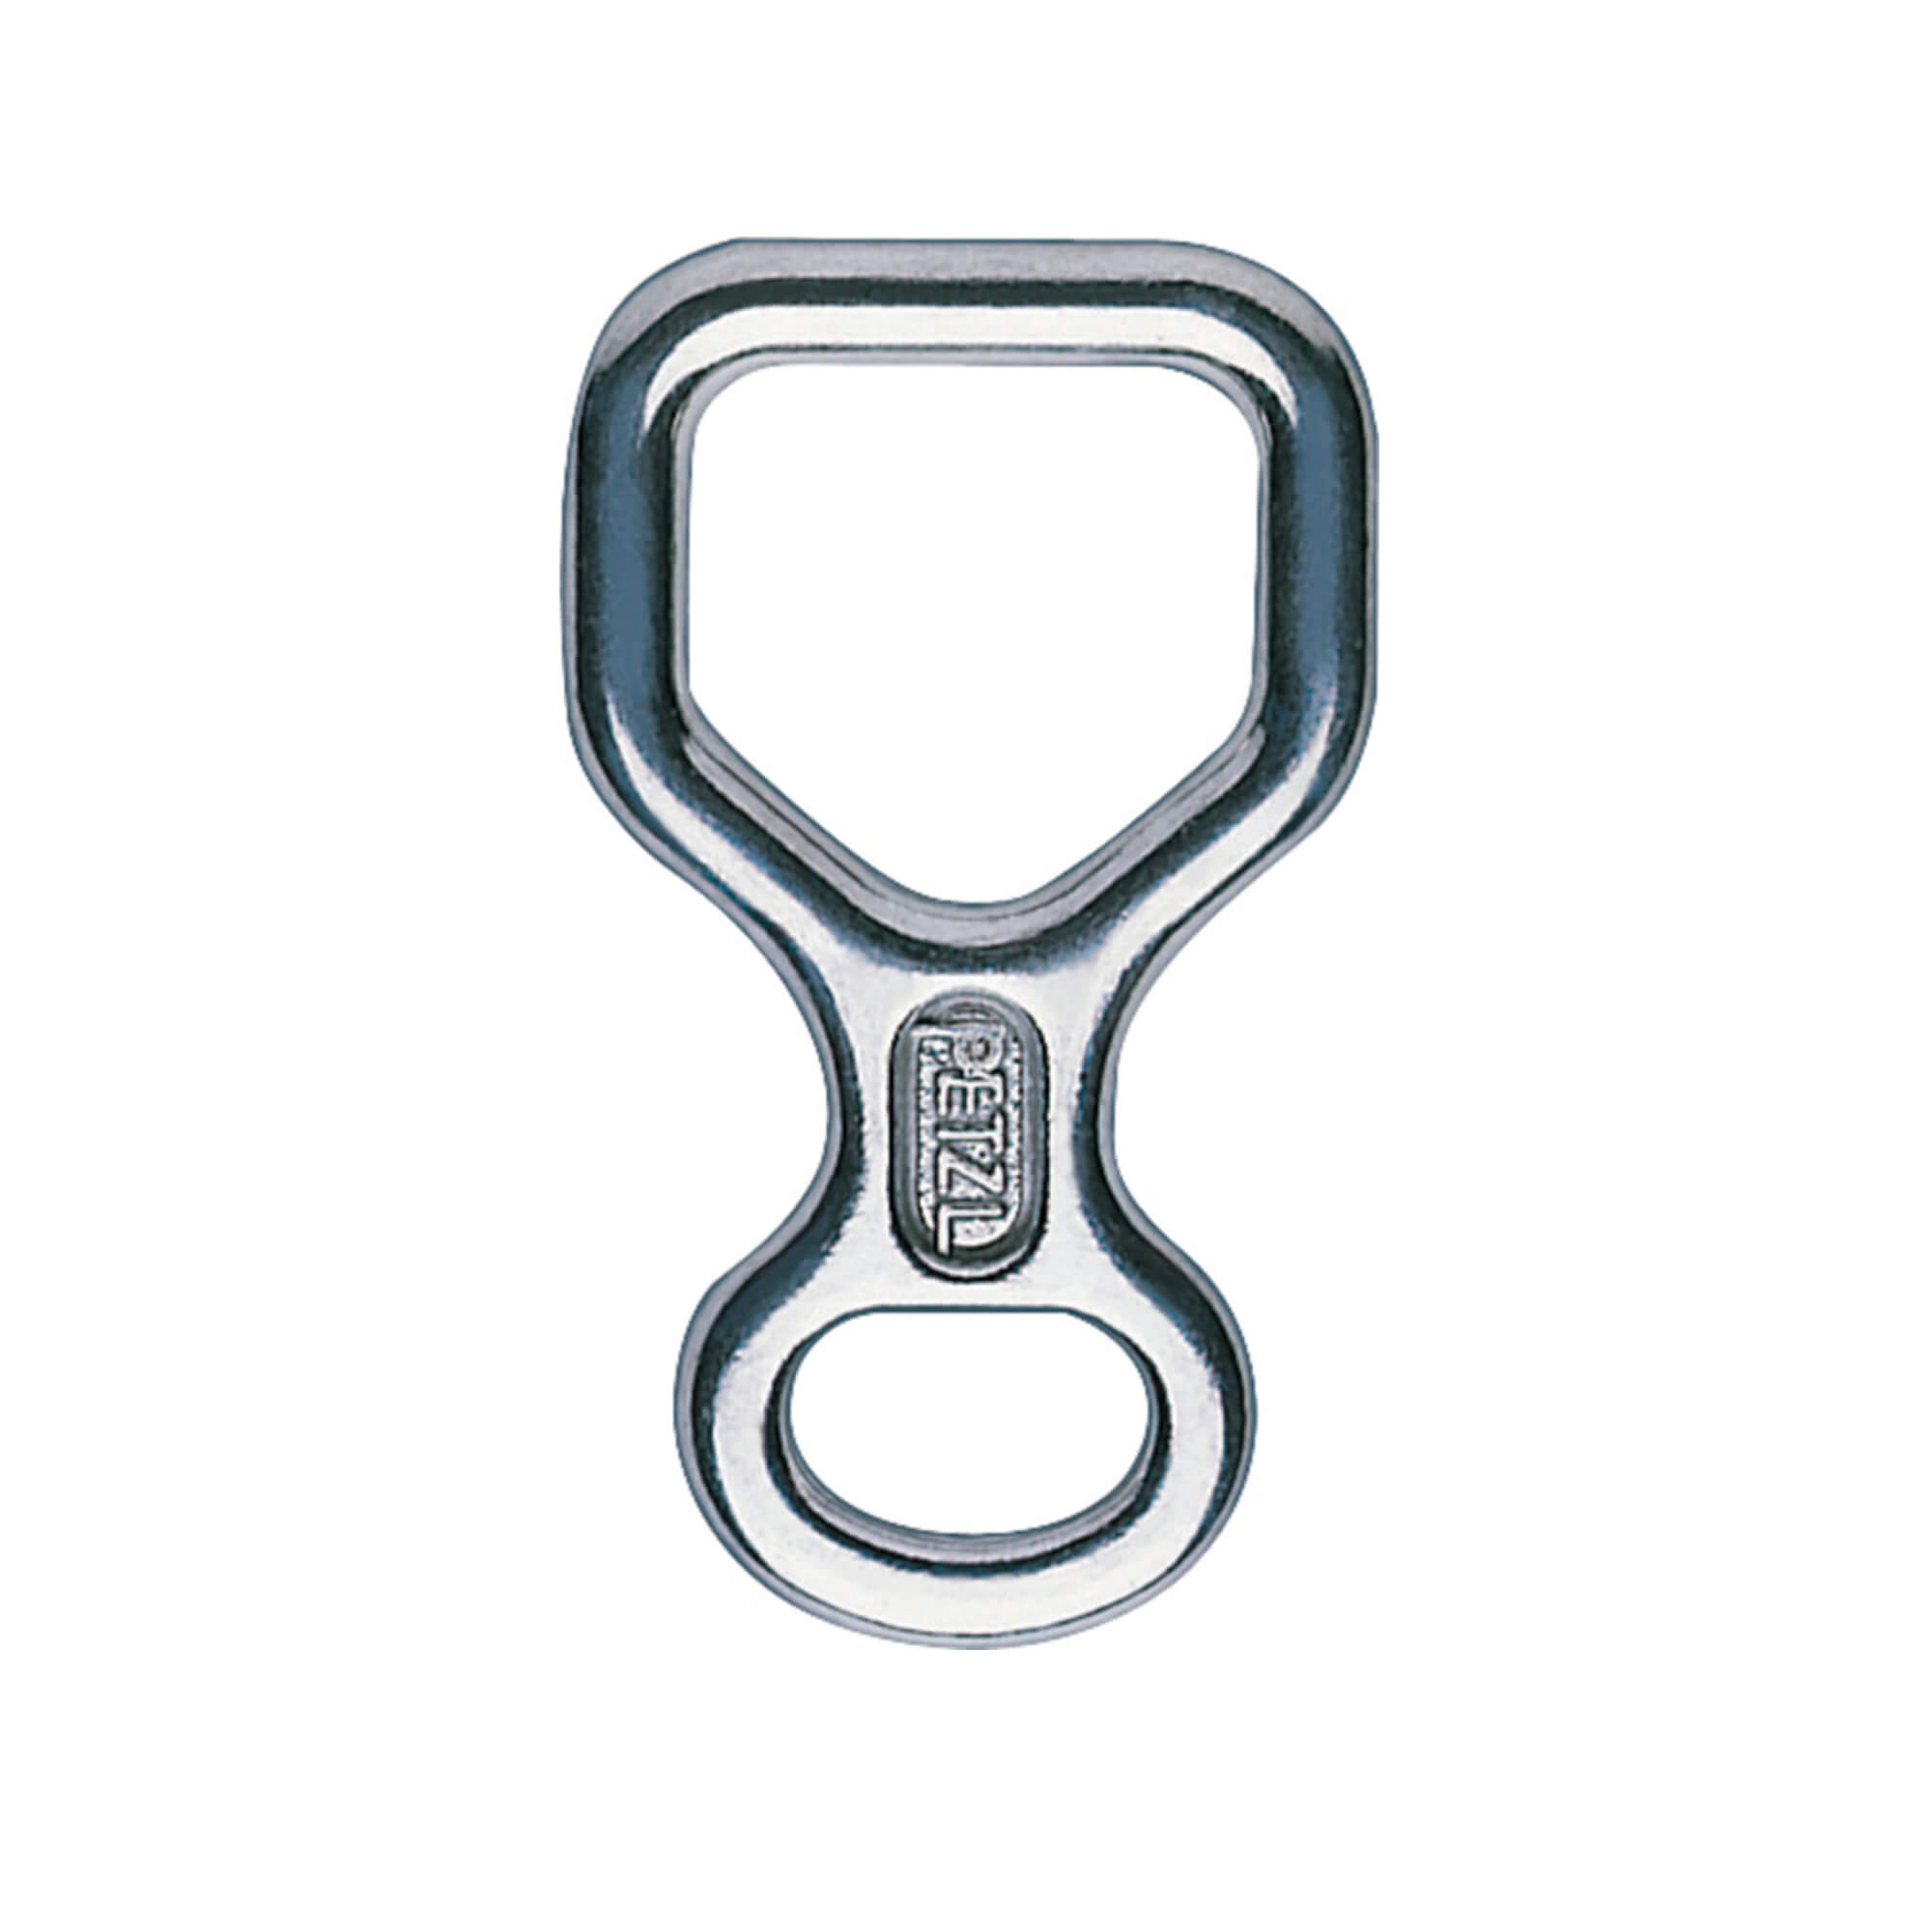 Figure Eight Descender for Climbing Rope